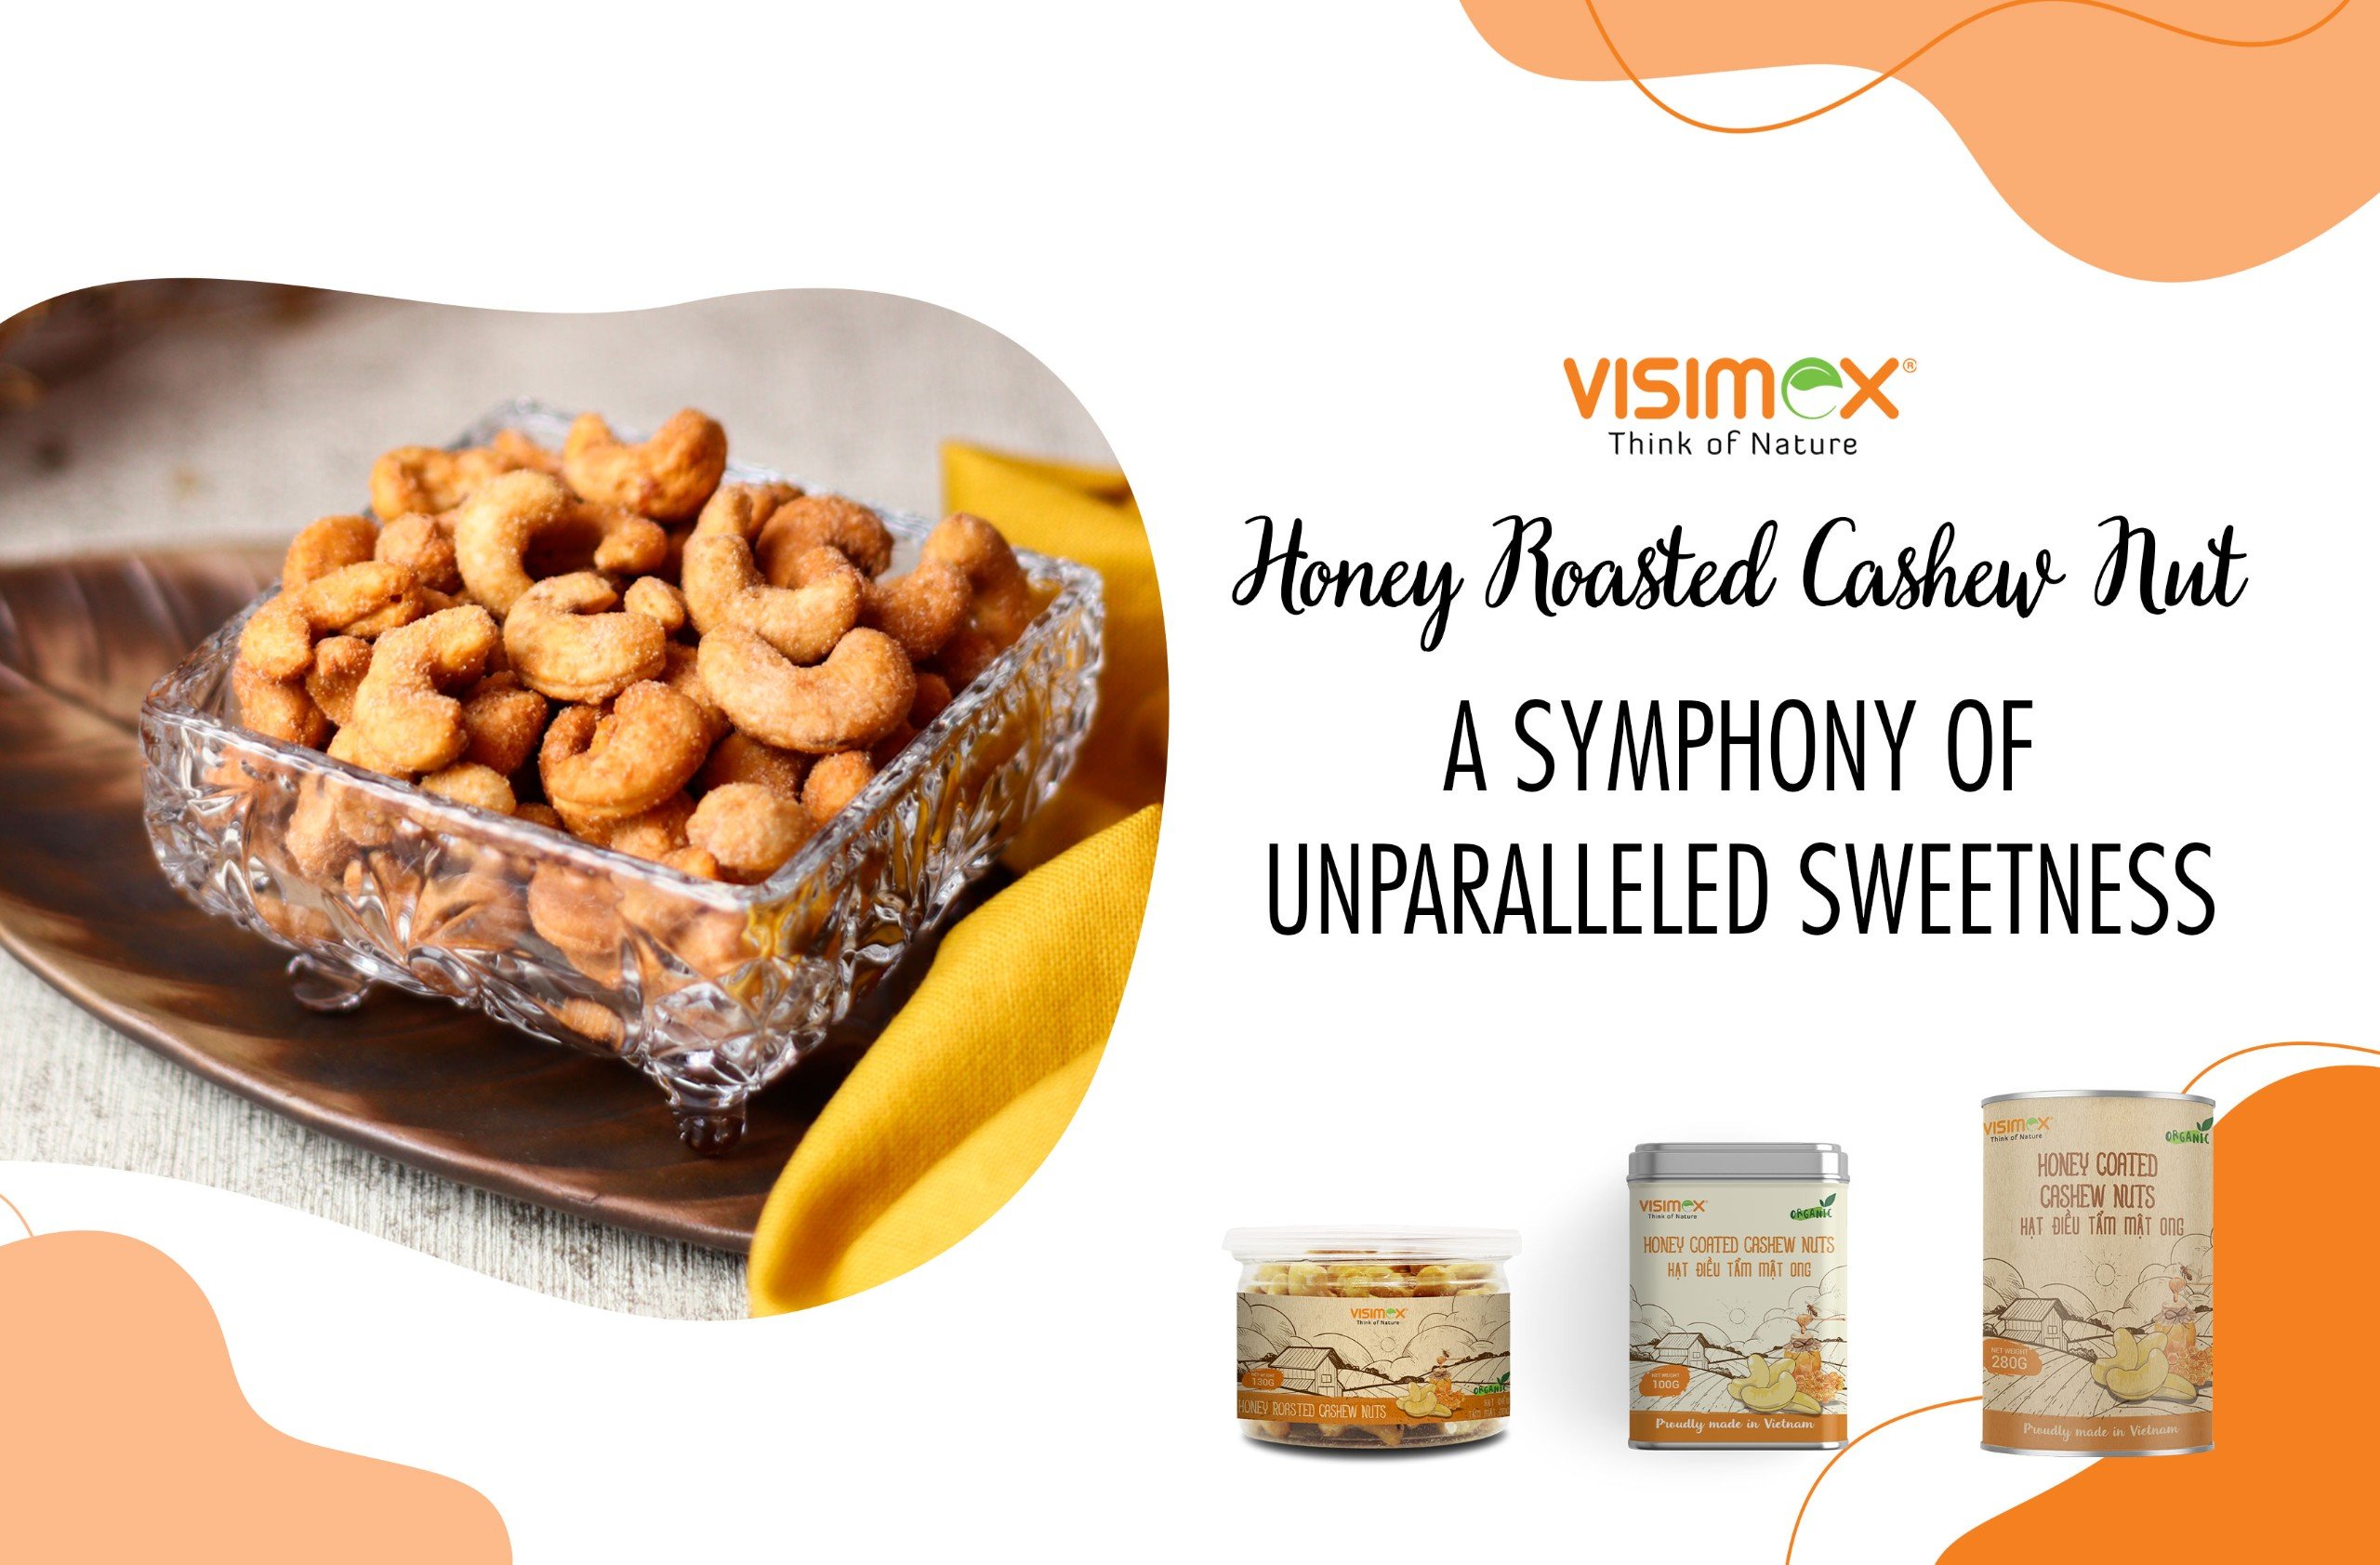 Honey Roasted Cashew Nuts: A Symphony of Unparalleled Sweetness